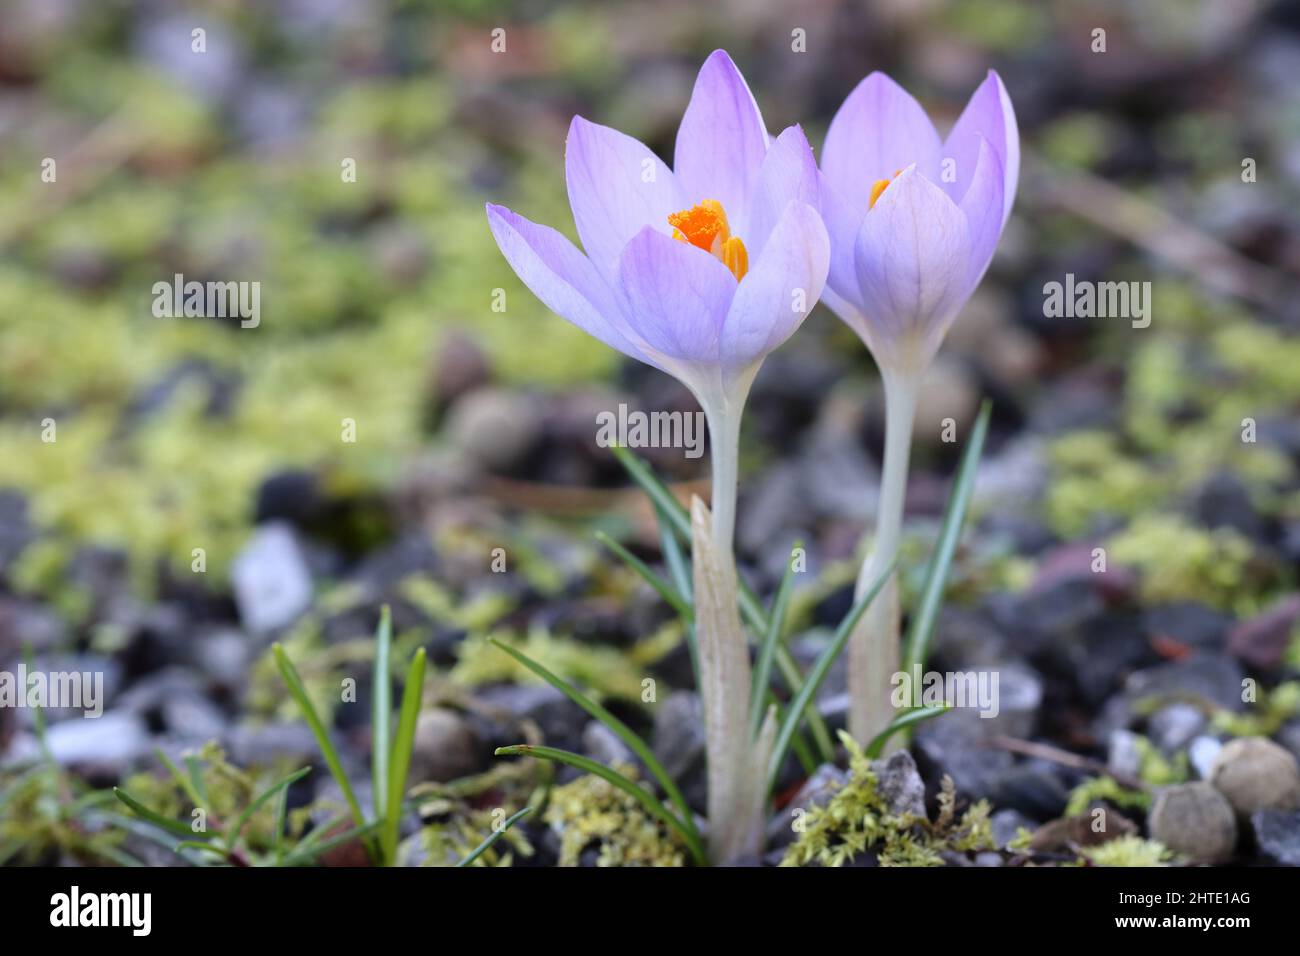 close-up of two pretty light blue crocus flowers, blurry background, copy space Stock Photo